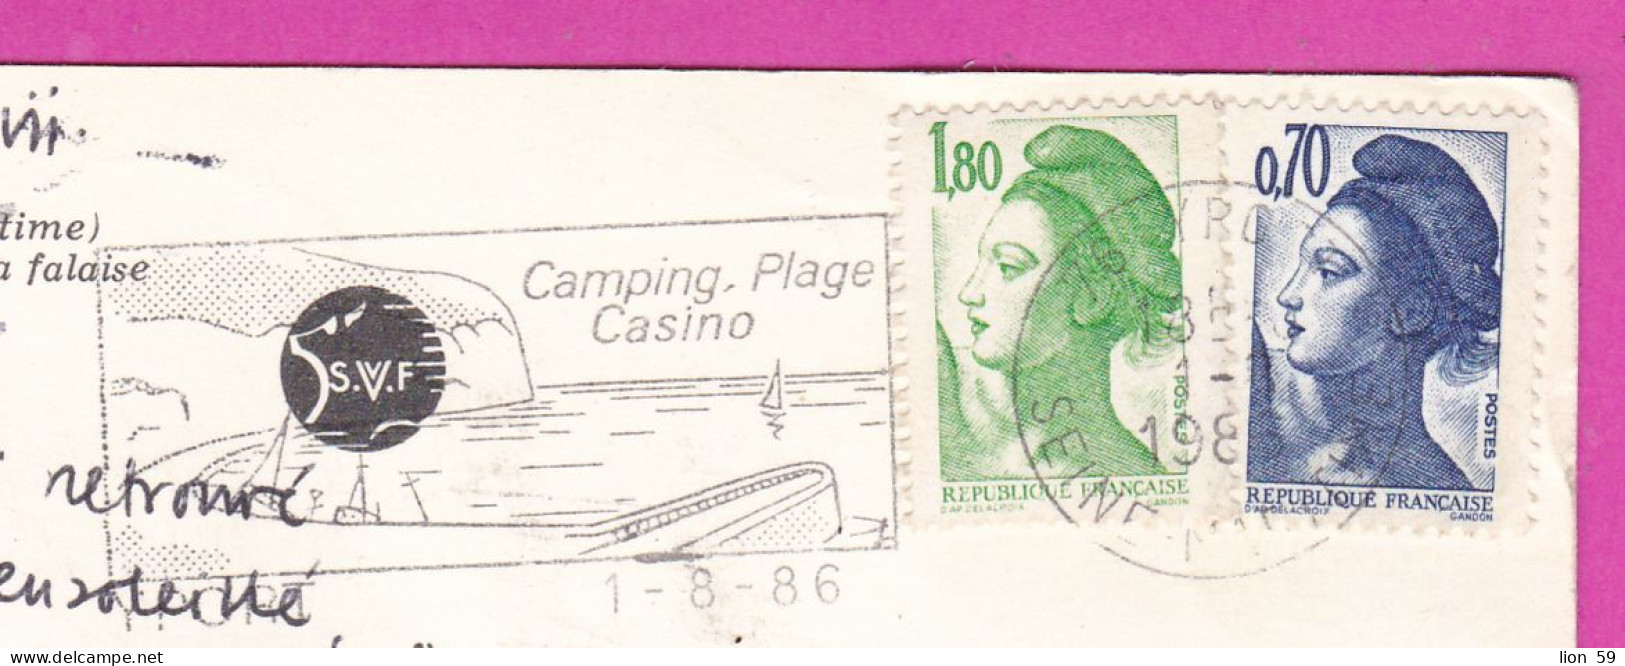 294207 / France - VAUCOTTES (Seine-Maritime) PC 1986 USED 0.70+1.80 Fr. Liberty Of Gandon Flamme Yport Camping Plage Cas - 1982-1990 Liberty Of Gandon